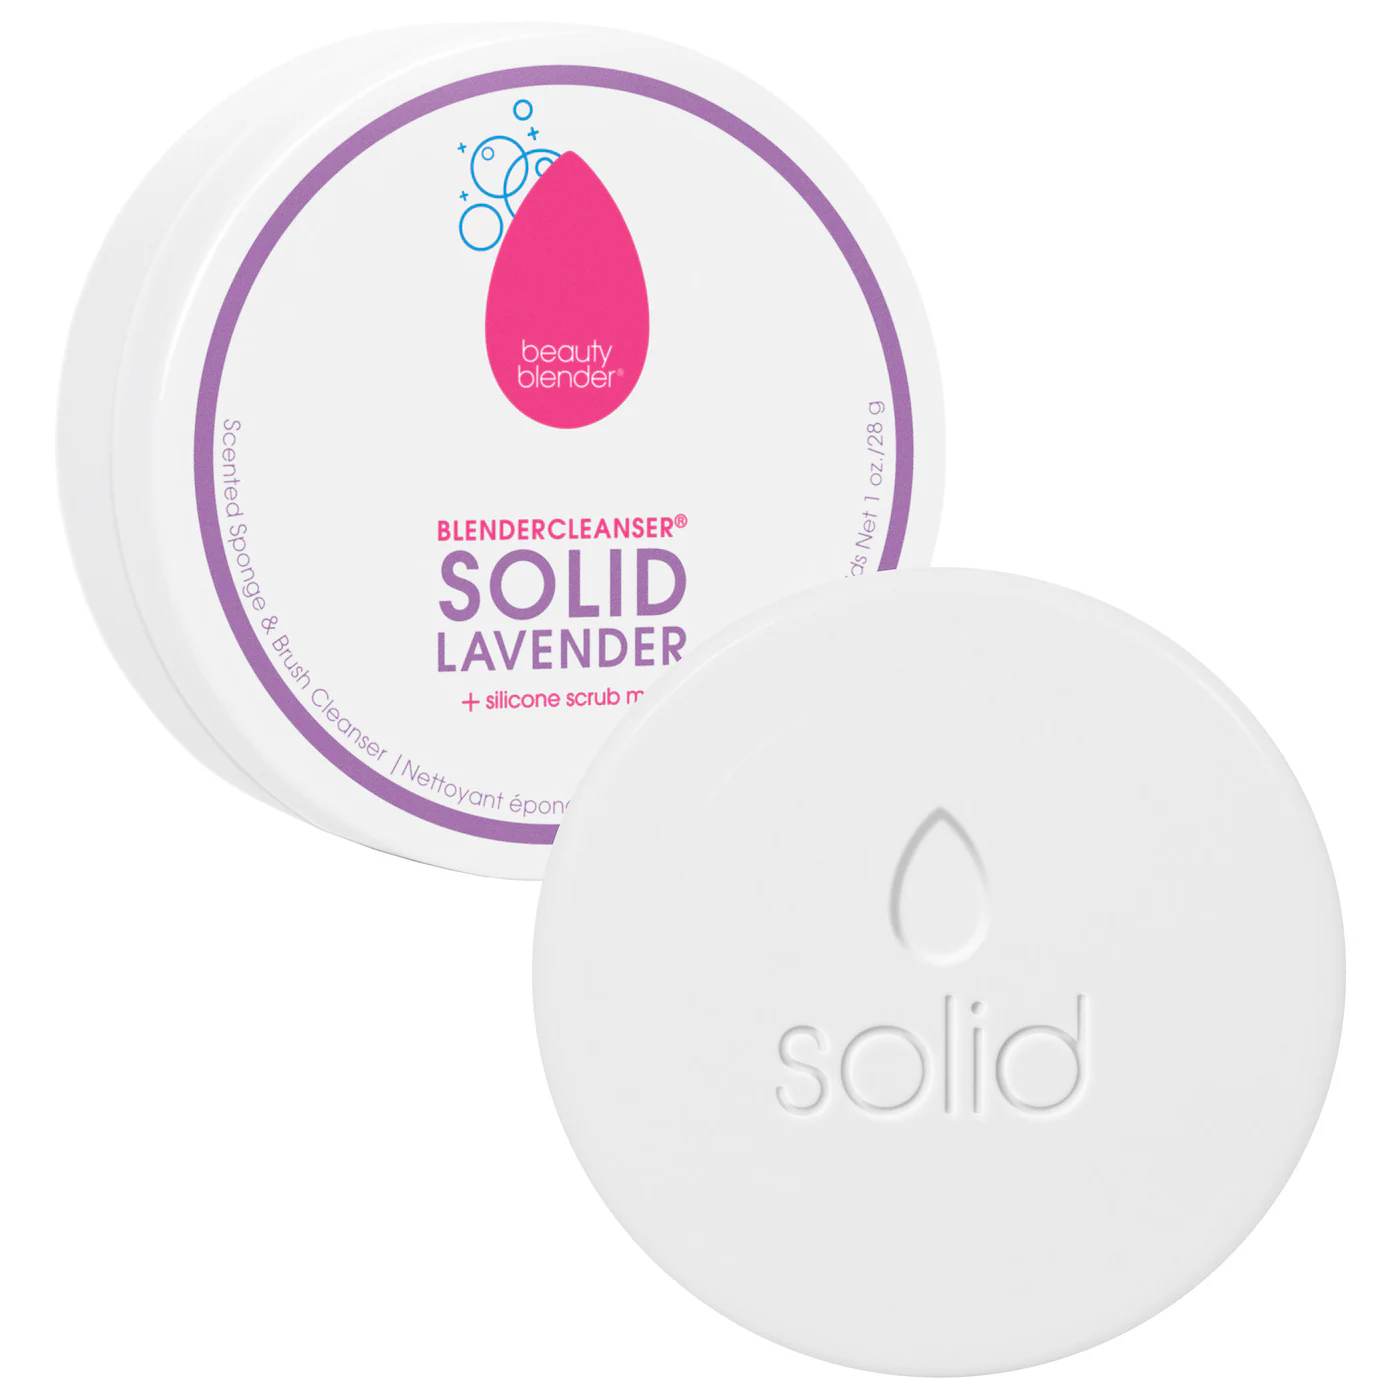 Product image of beautyblender blendercleanser solid, a product that is used when how to clean makeup sponges